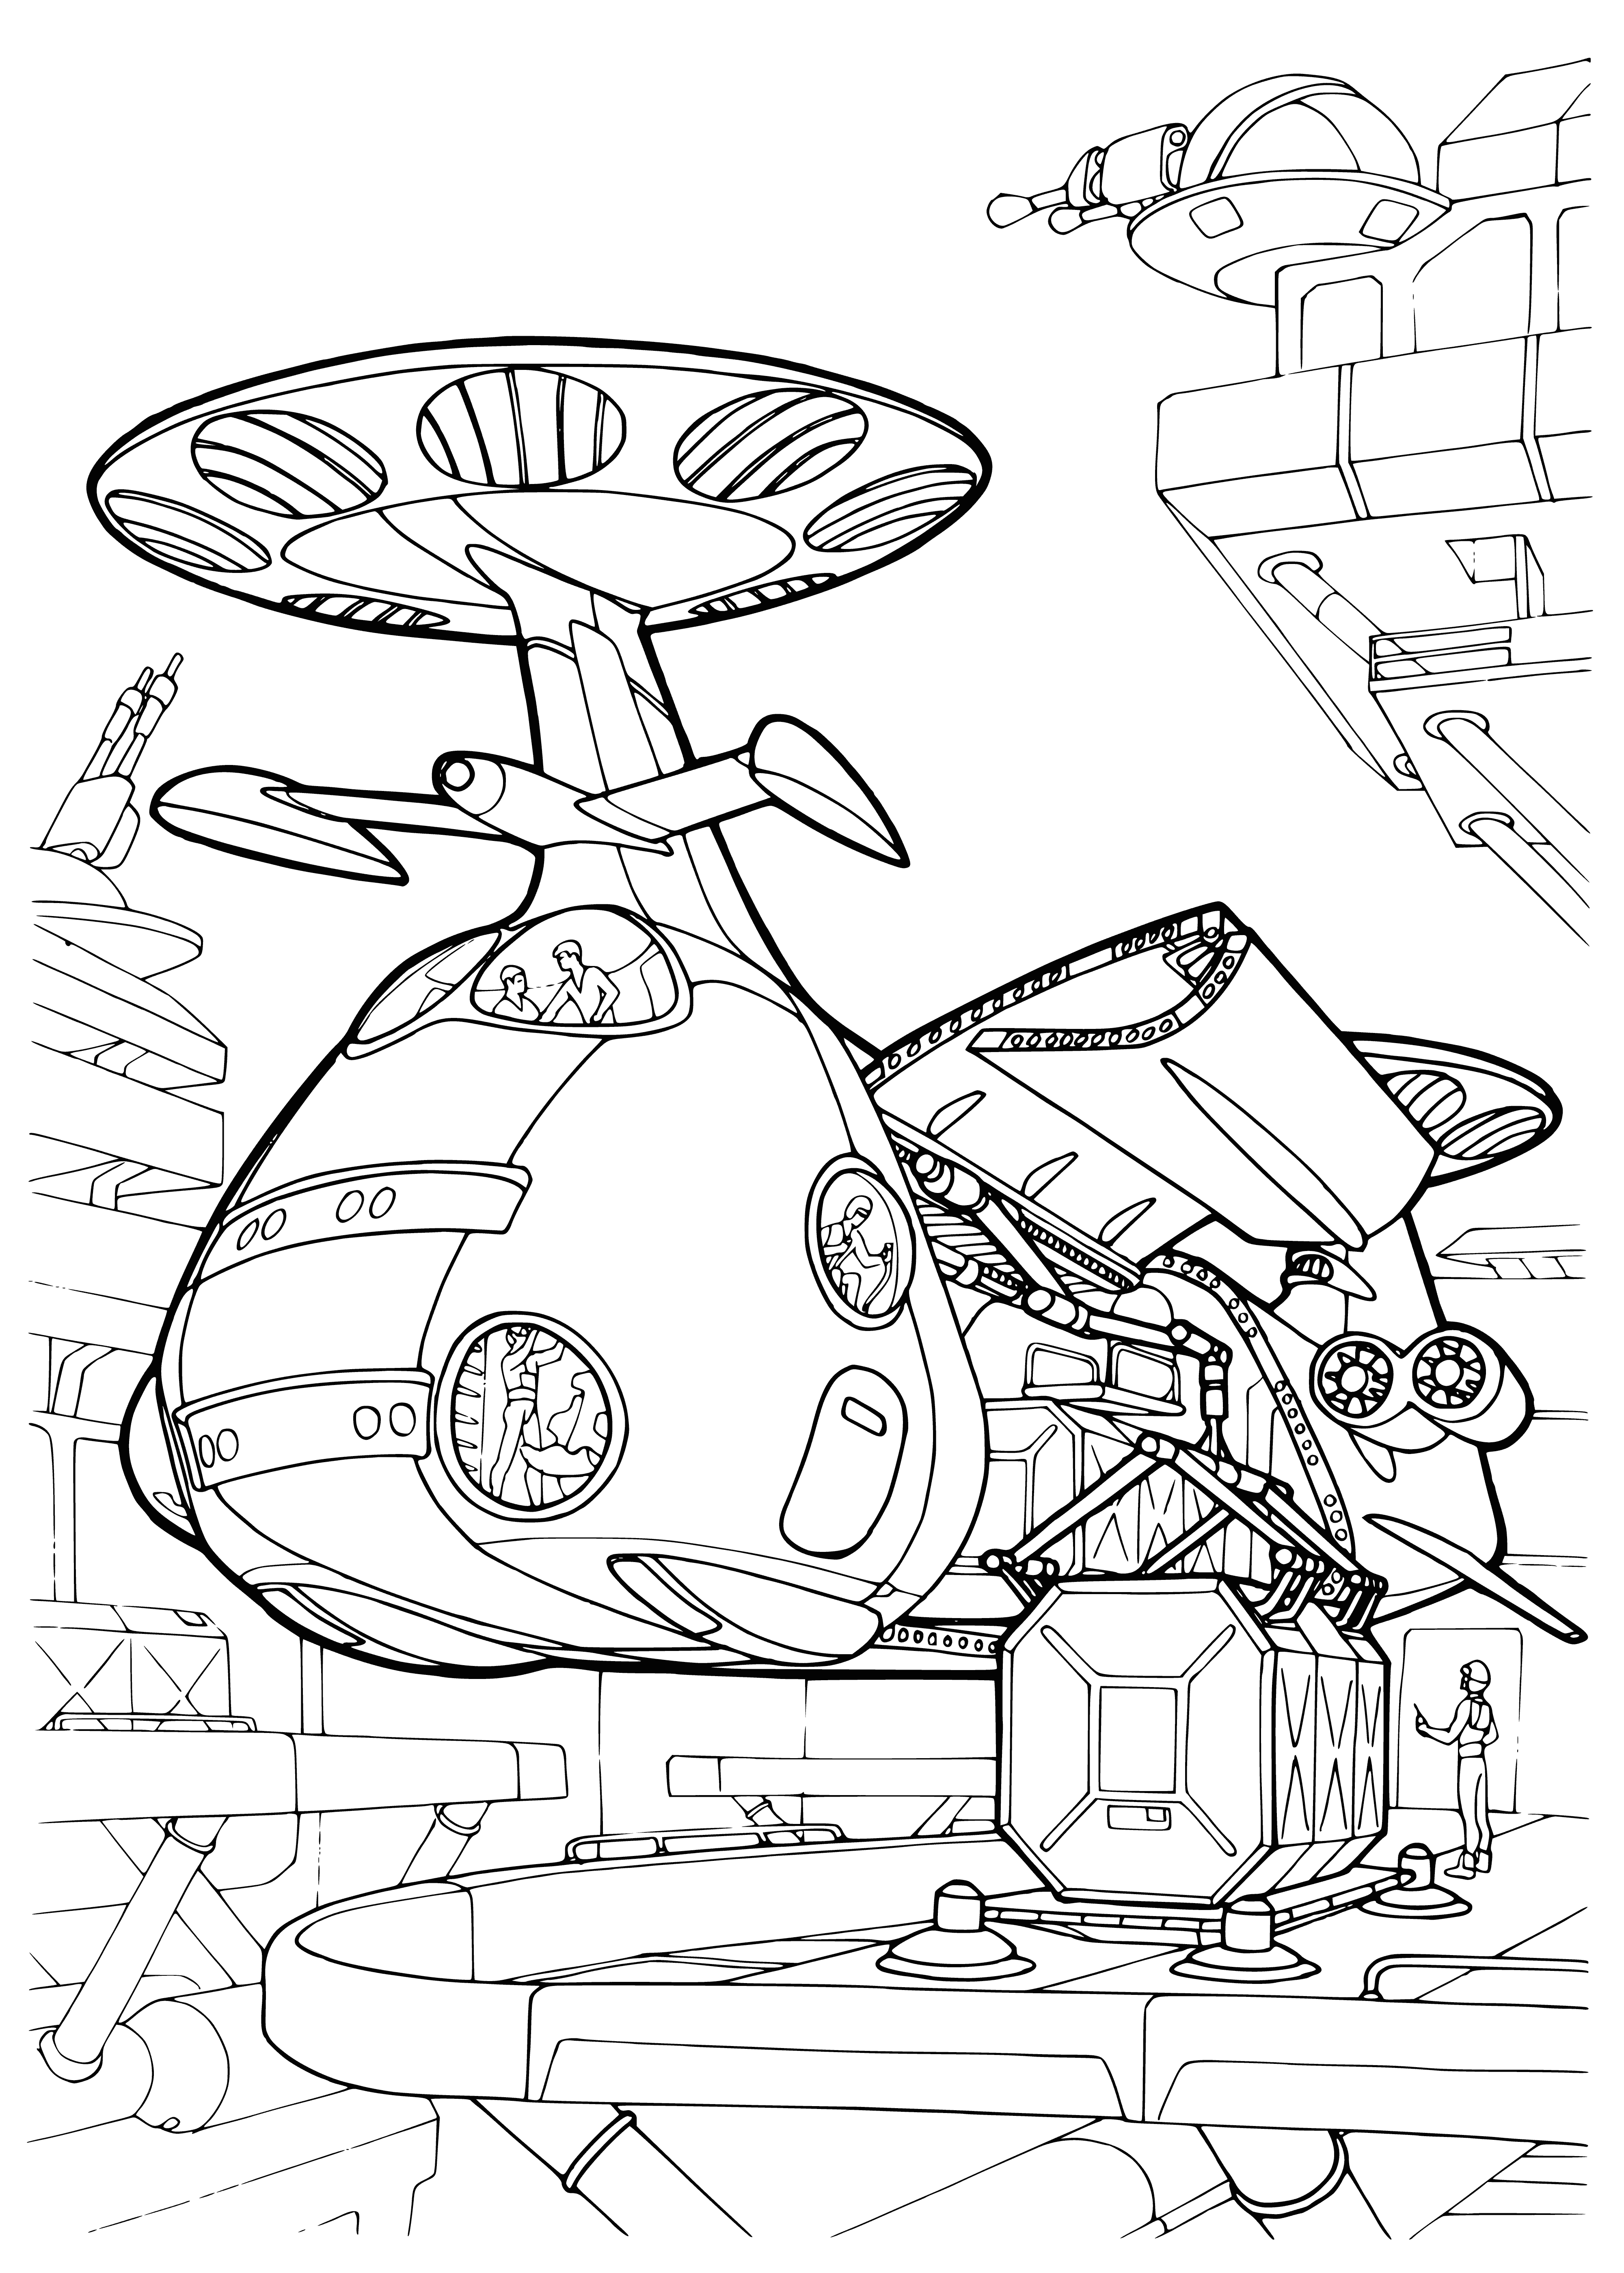 coloring page: Public appliances such as cars, trains, and buses enable people and goods to be transported securely and quickly from A to B.